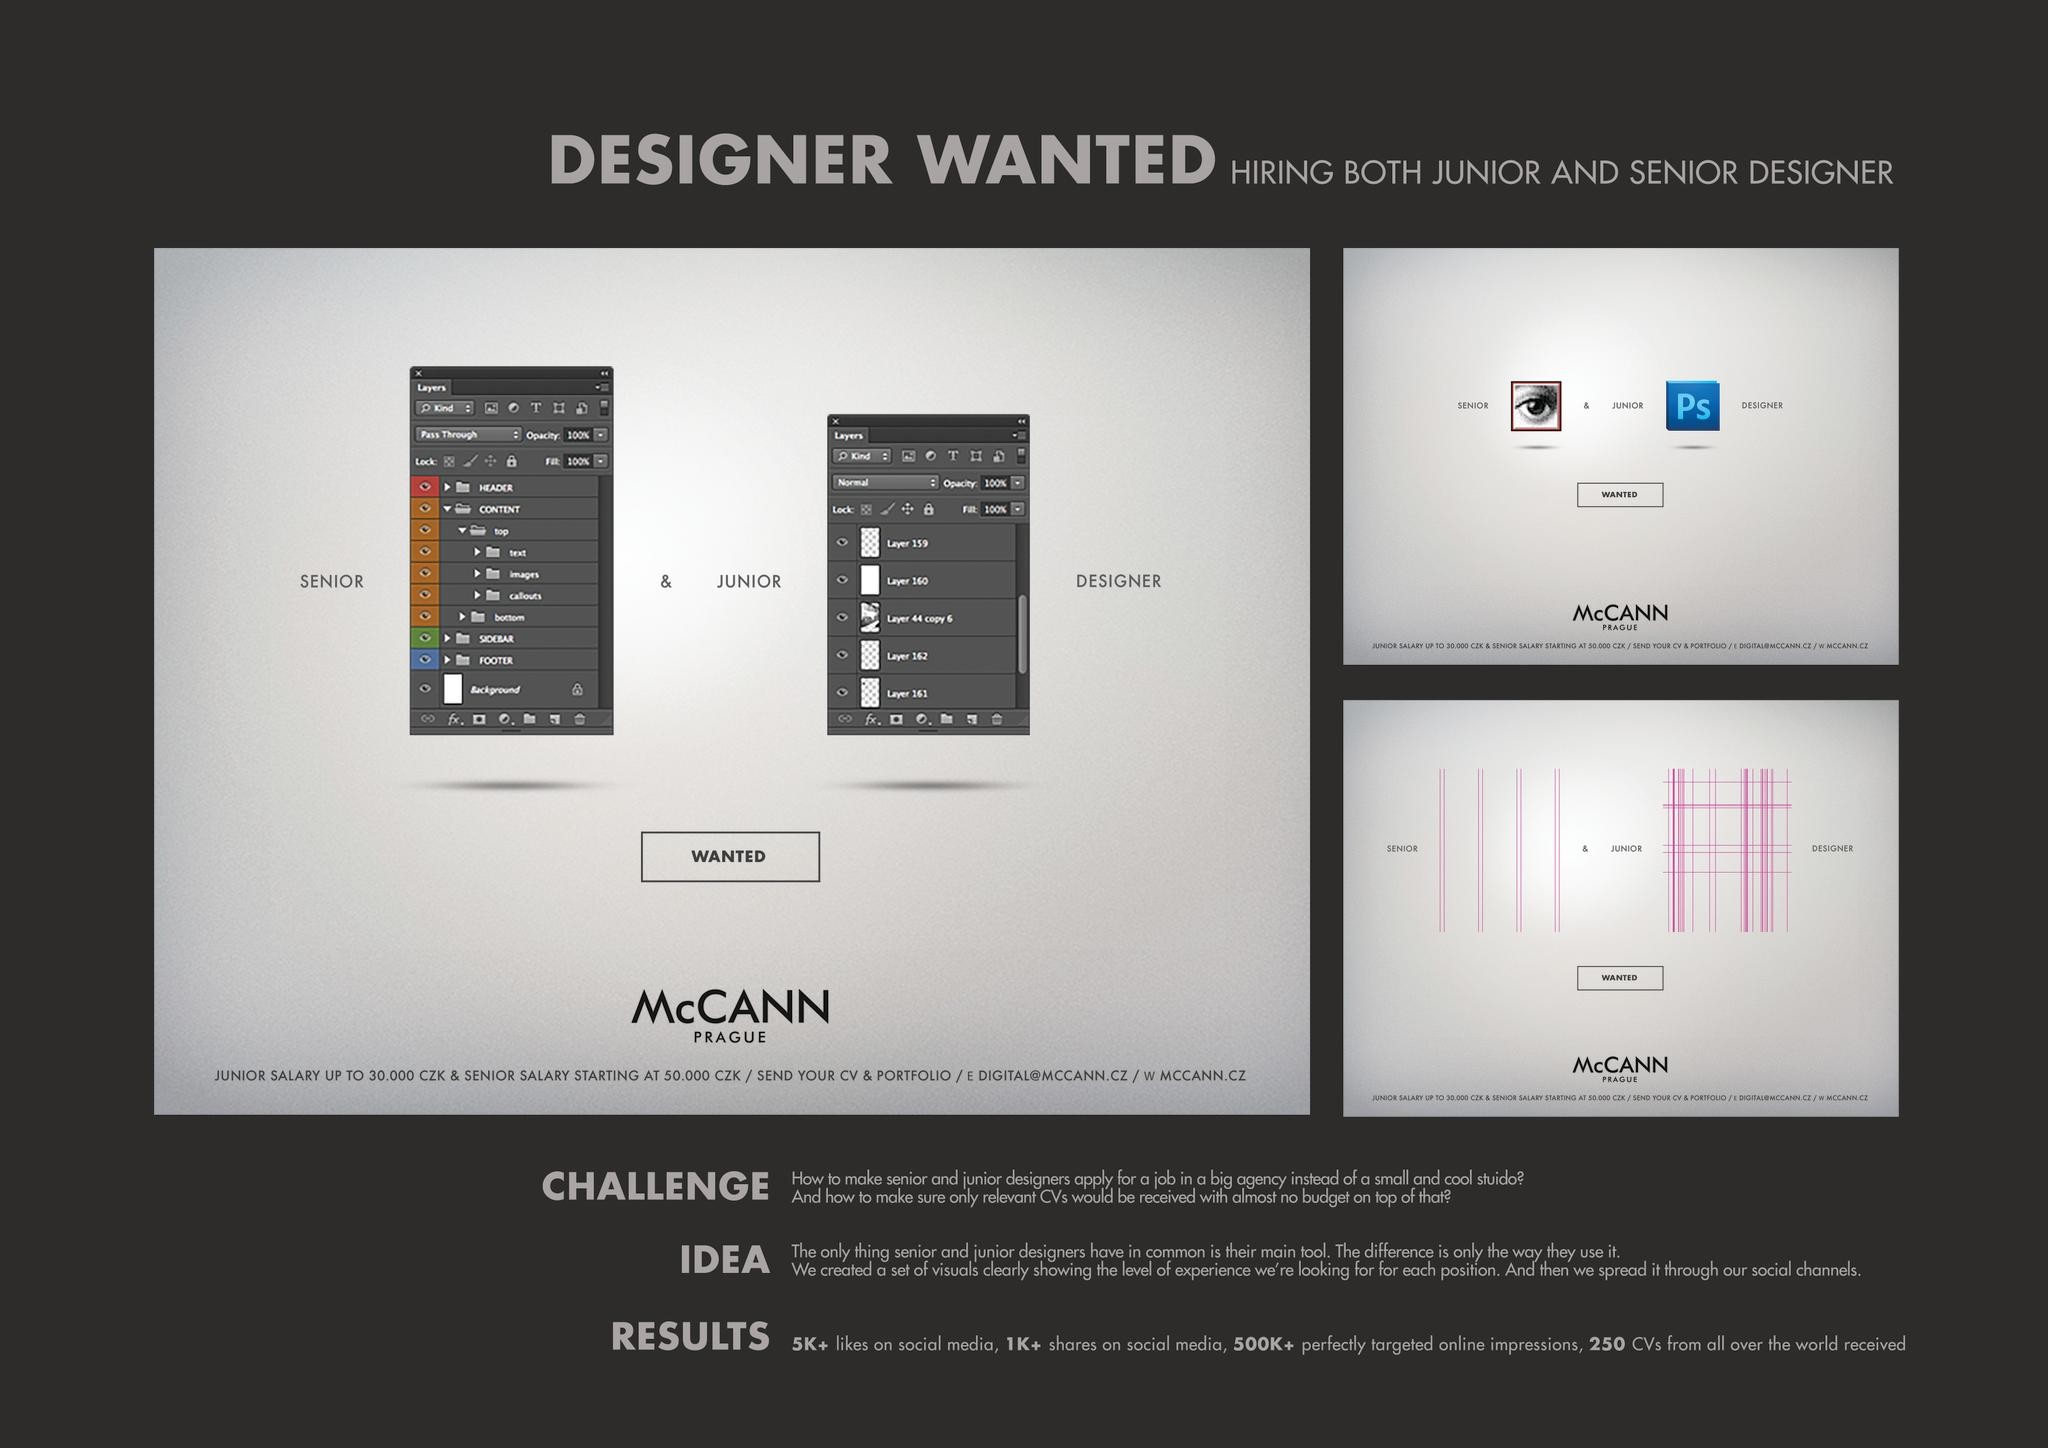 DESIGNERS WANTED